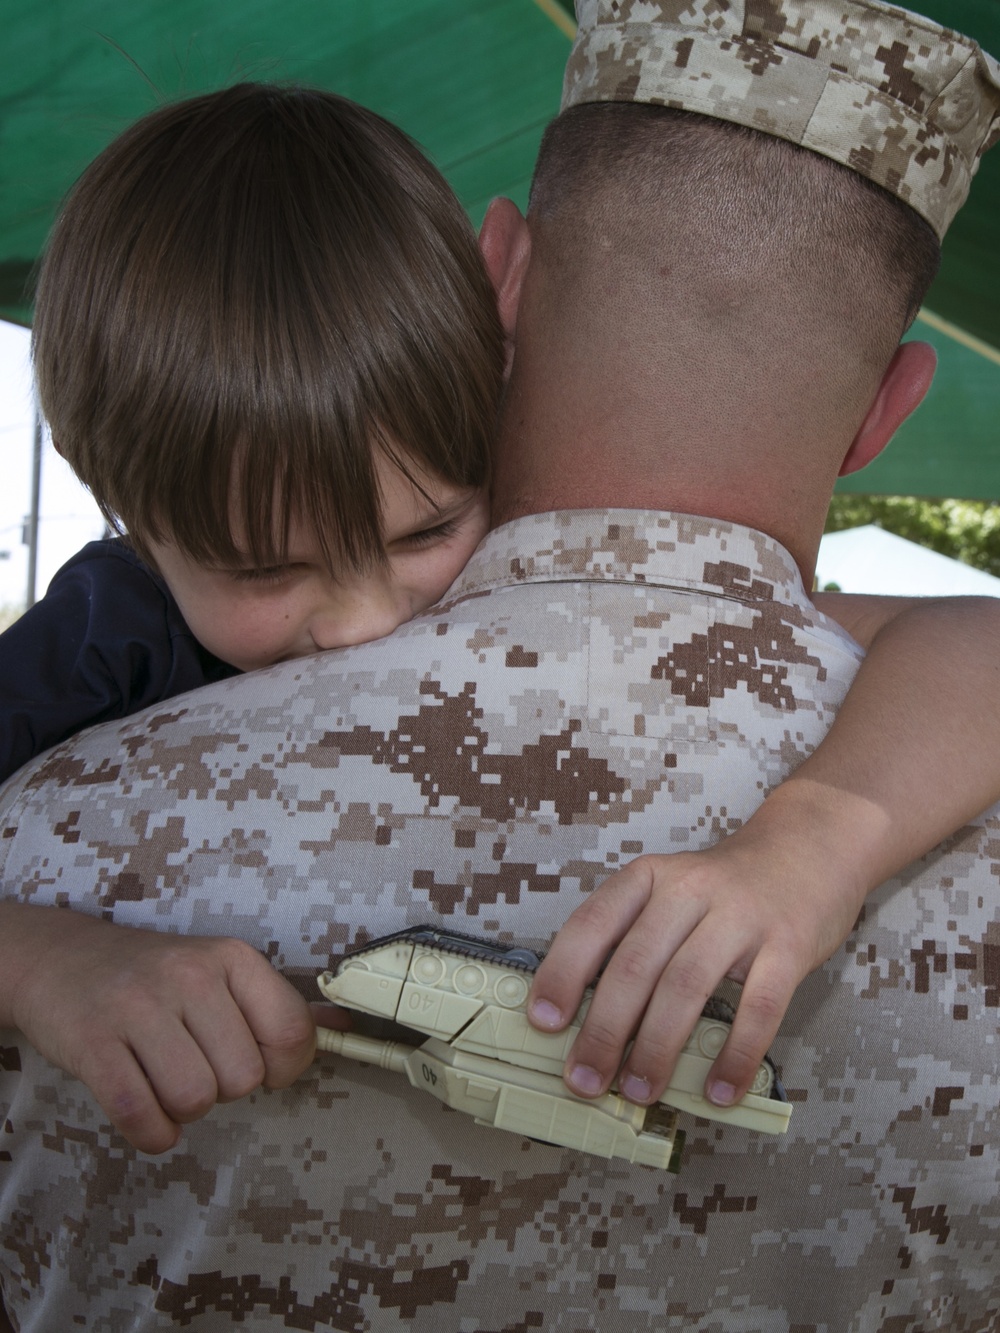 The Single Military Father: A balance of nobility